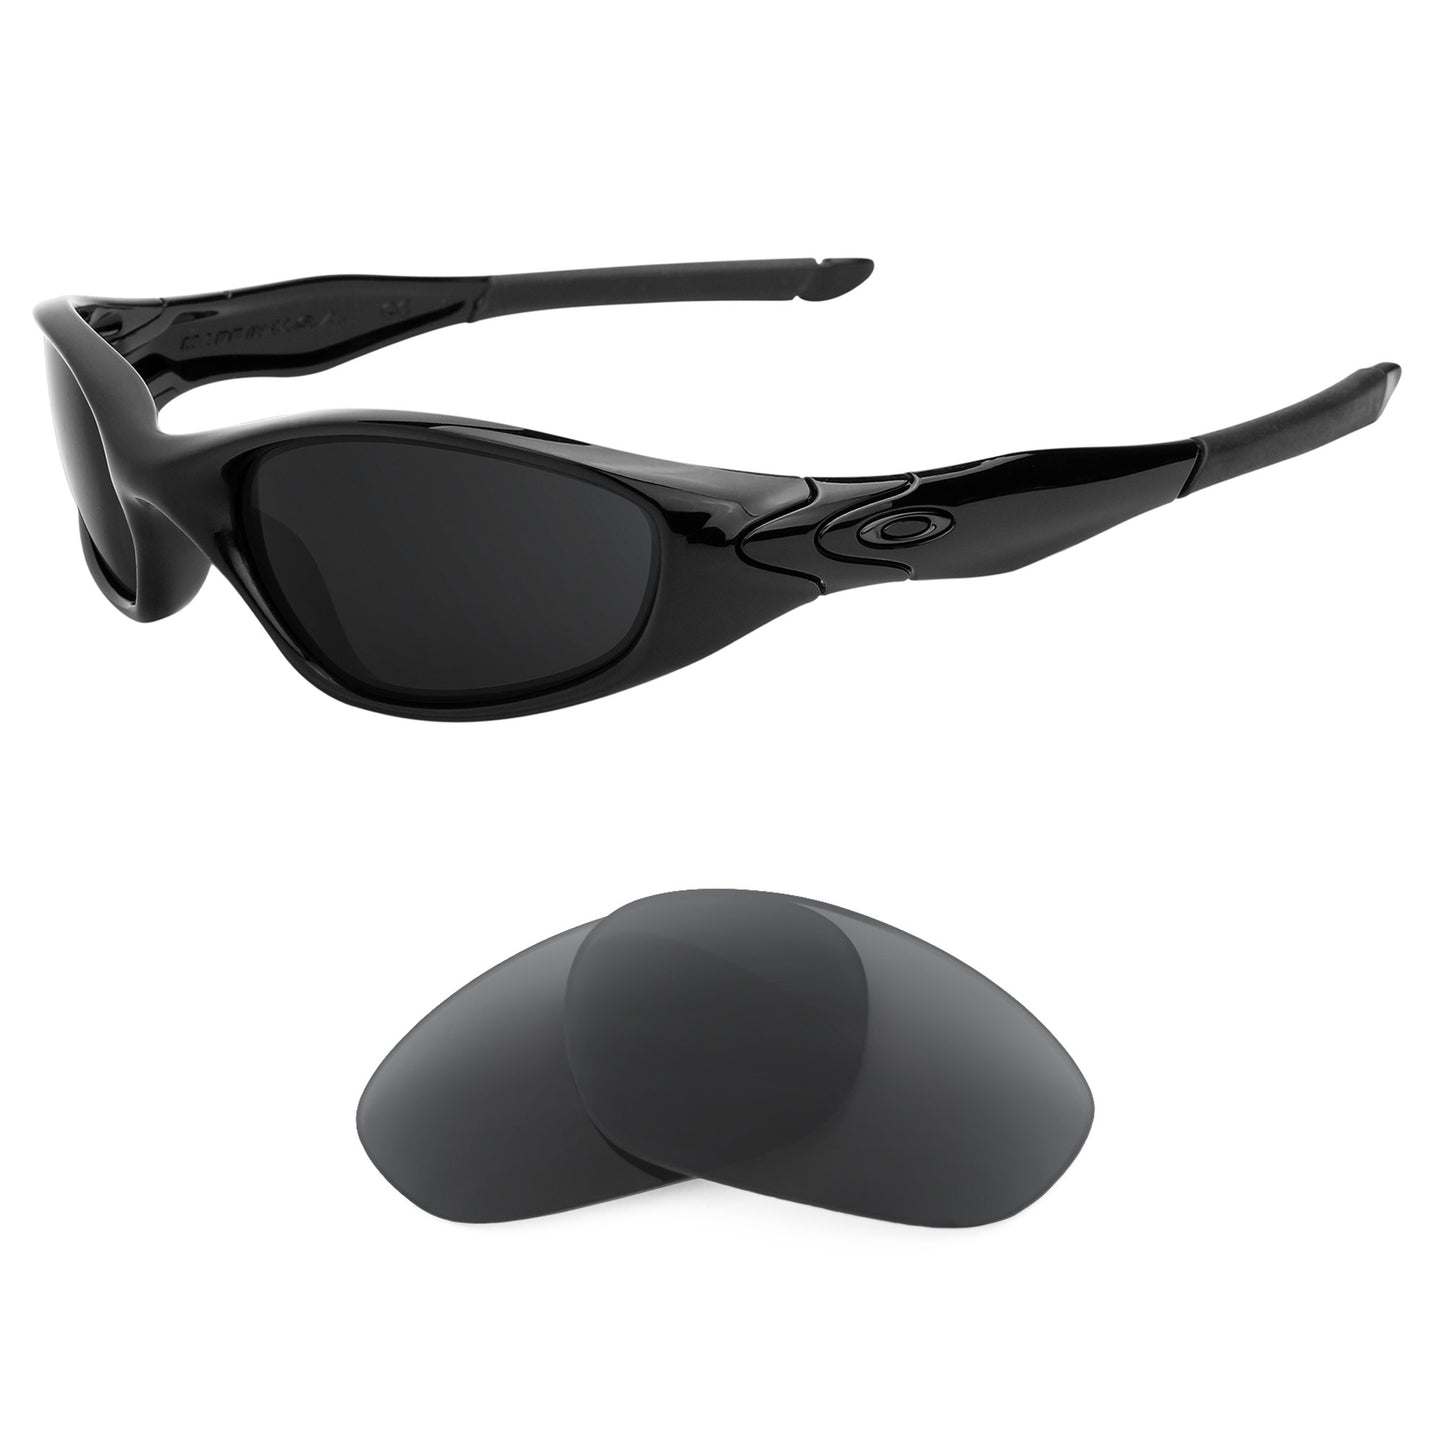 Oakley Minute 2.0 sunglasses with replacement lenses